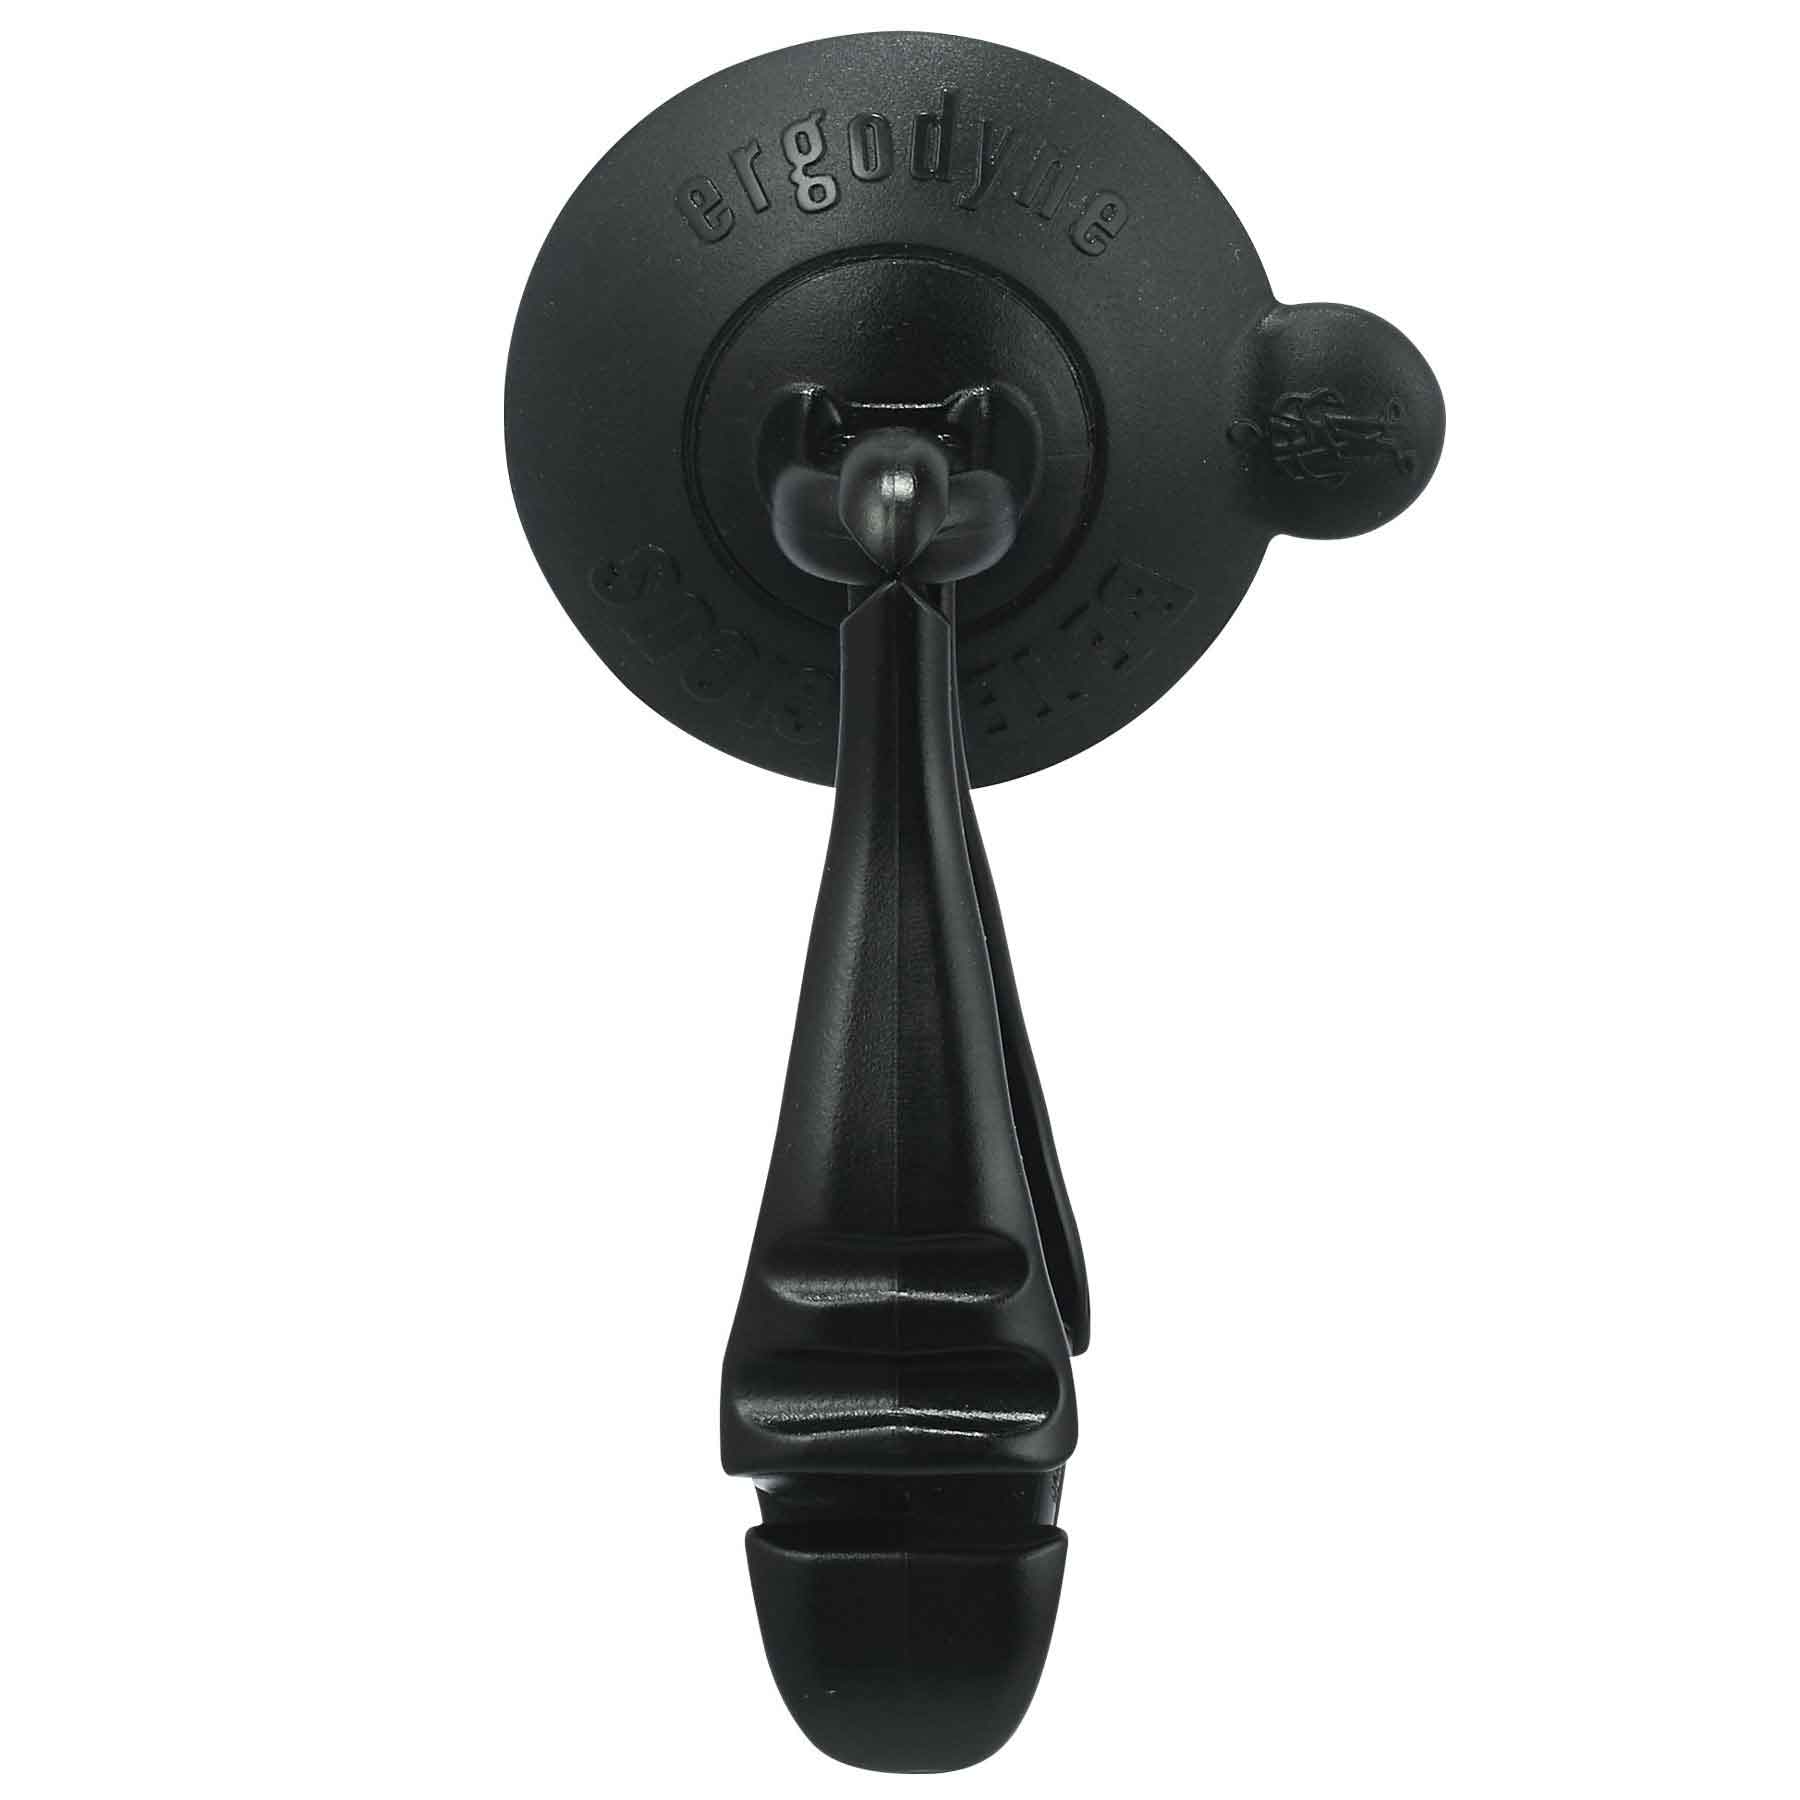 Squids® Grabber Anchor - Suction Cup Mount